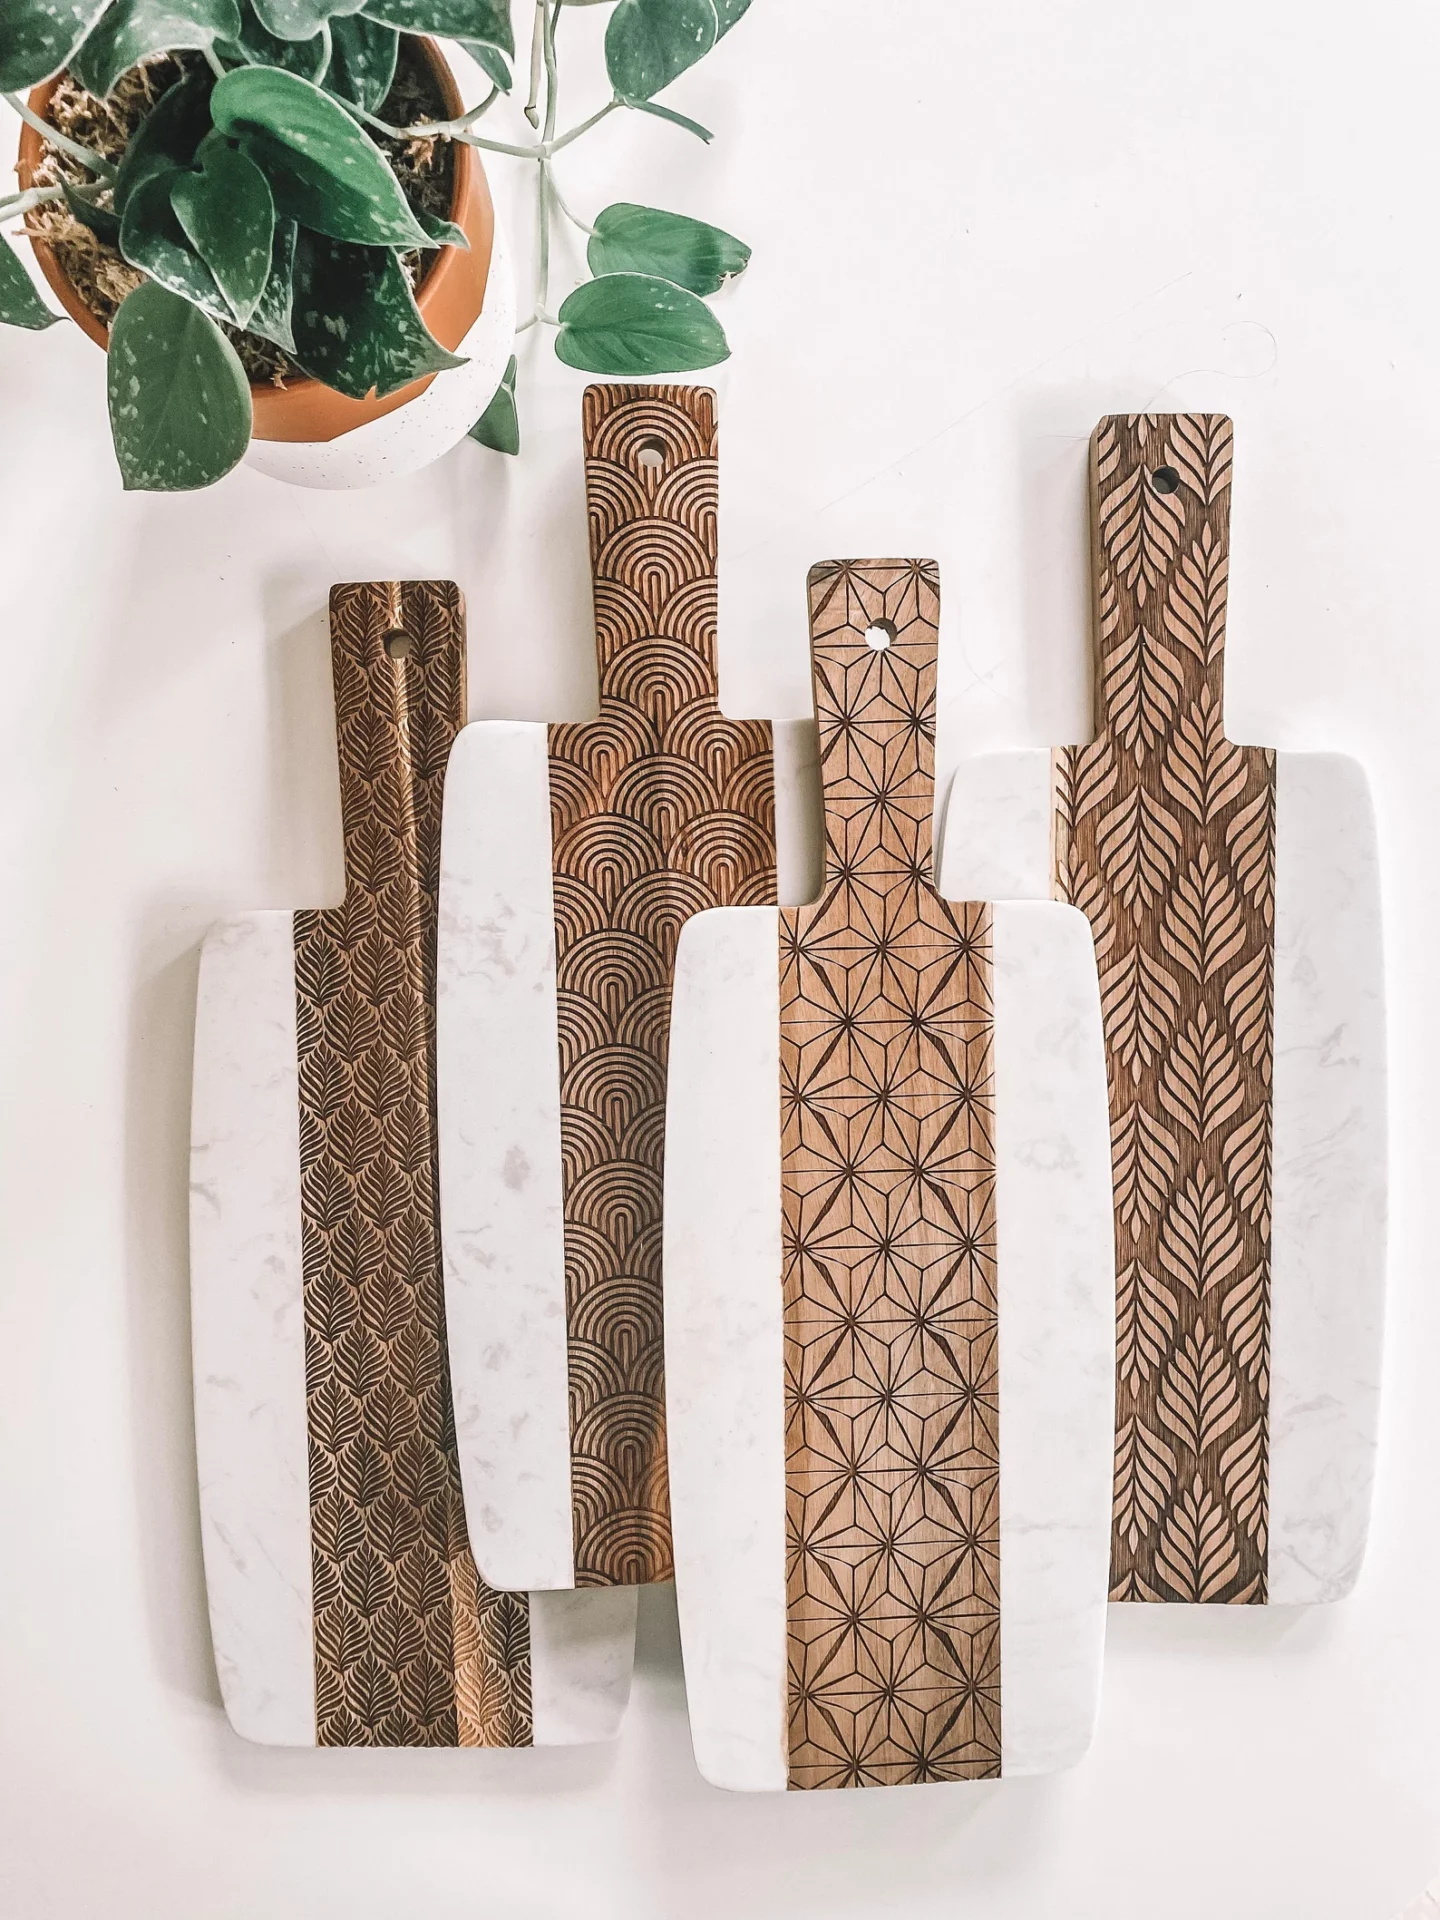 4 marble and wood charcuterie boards from etsy